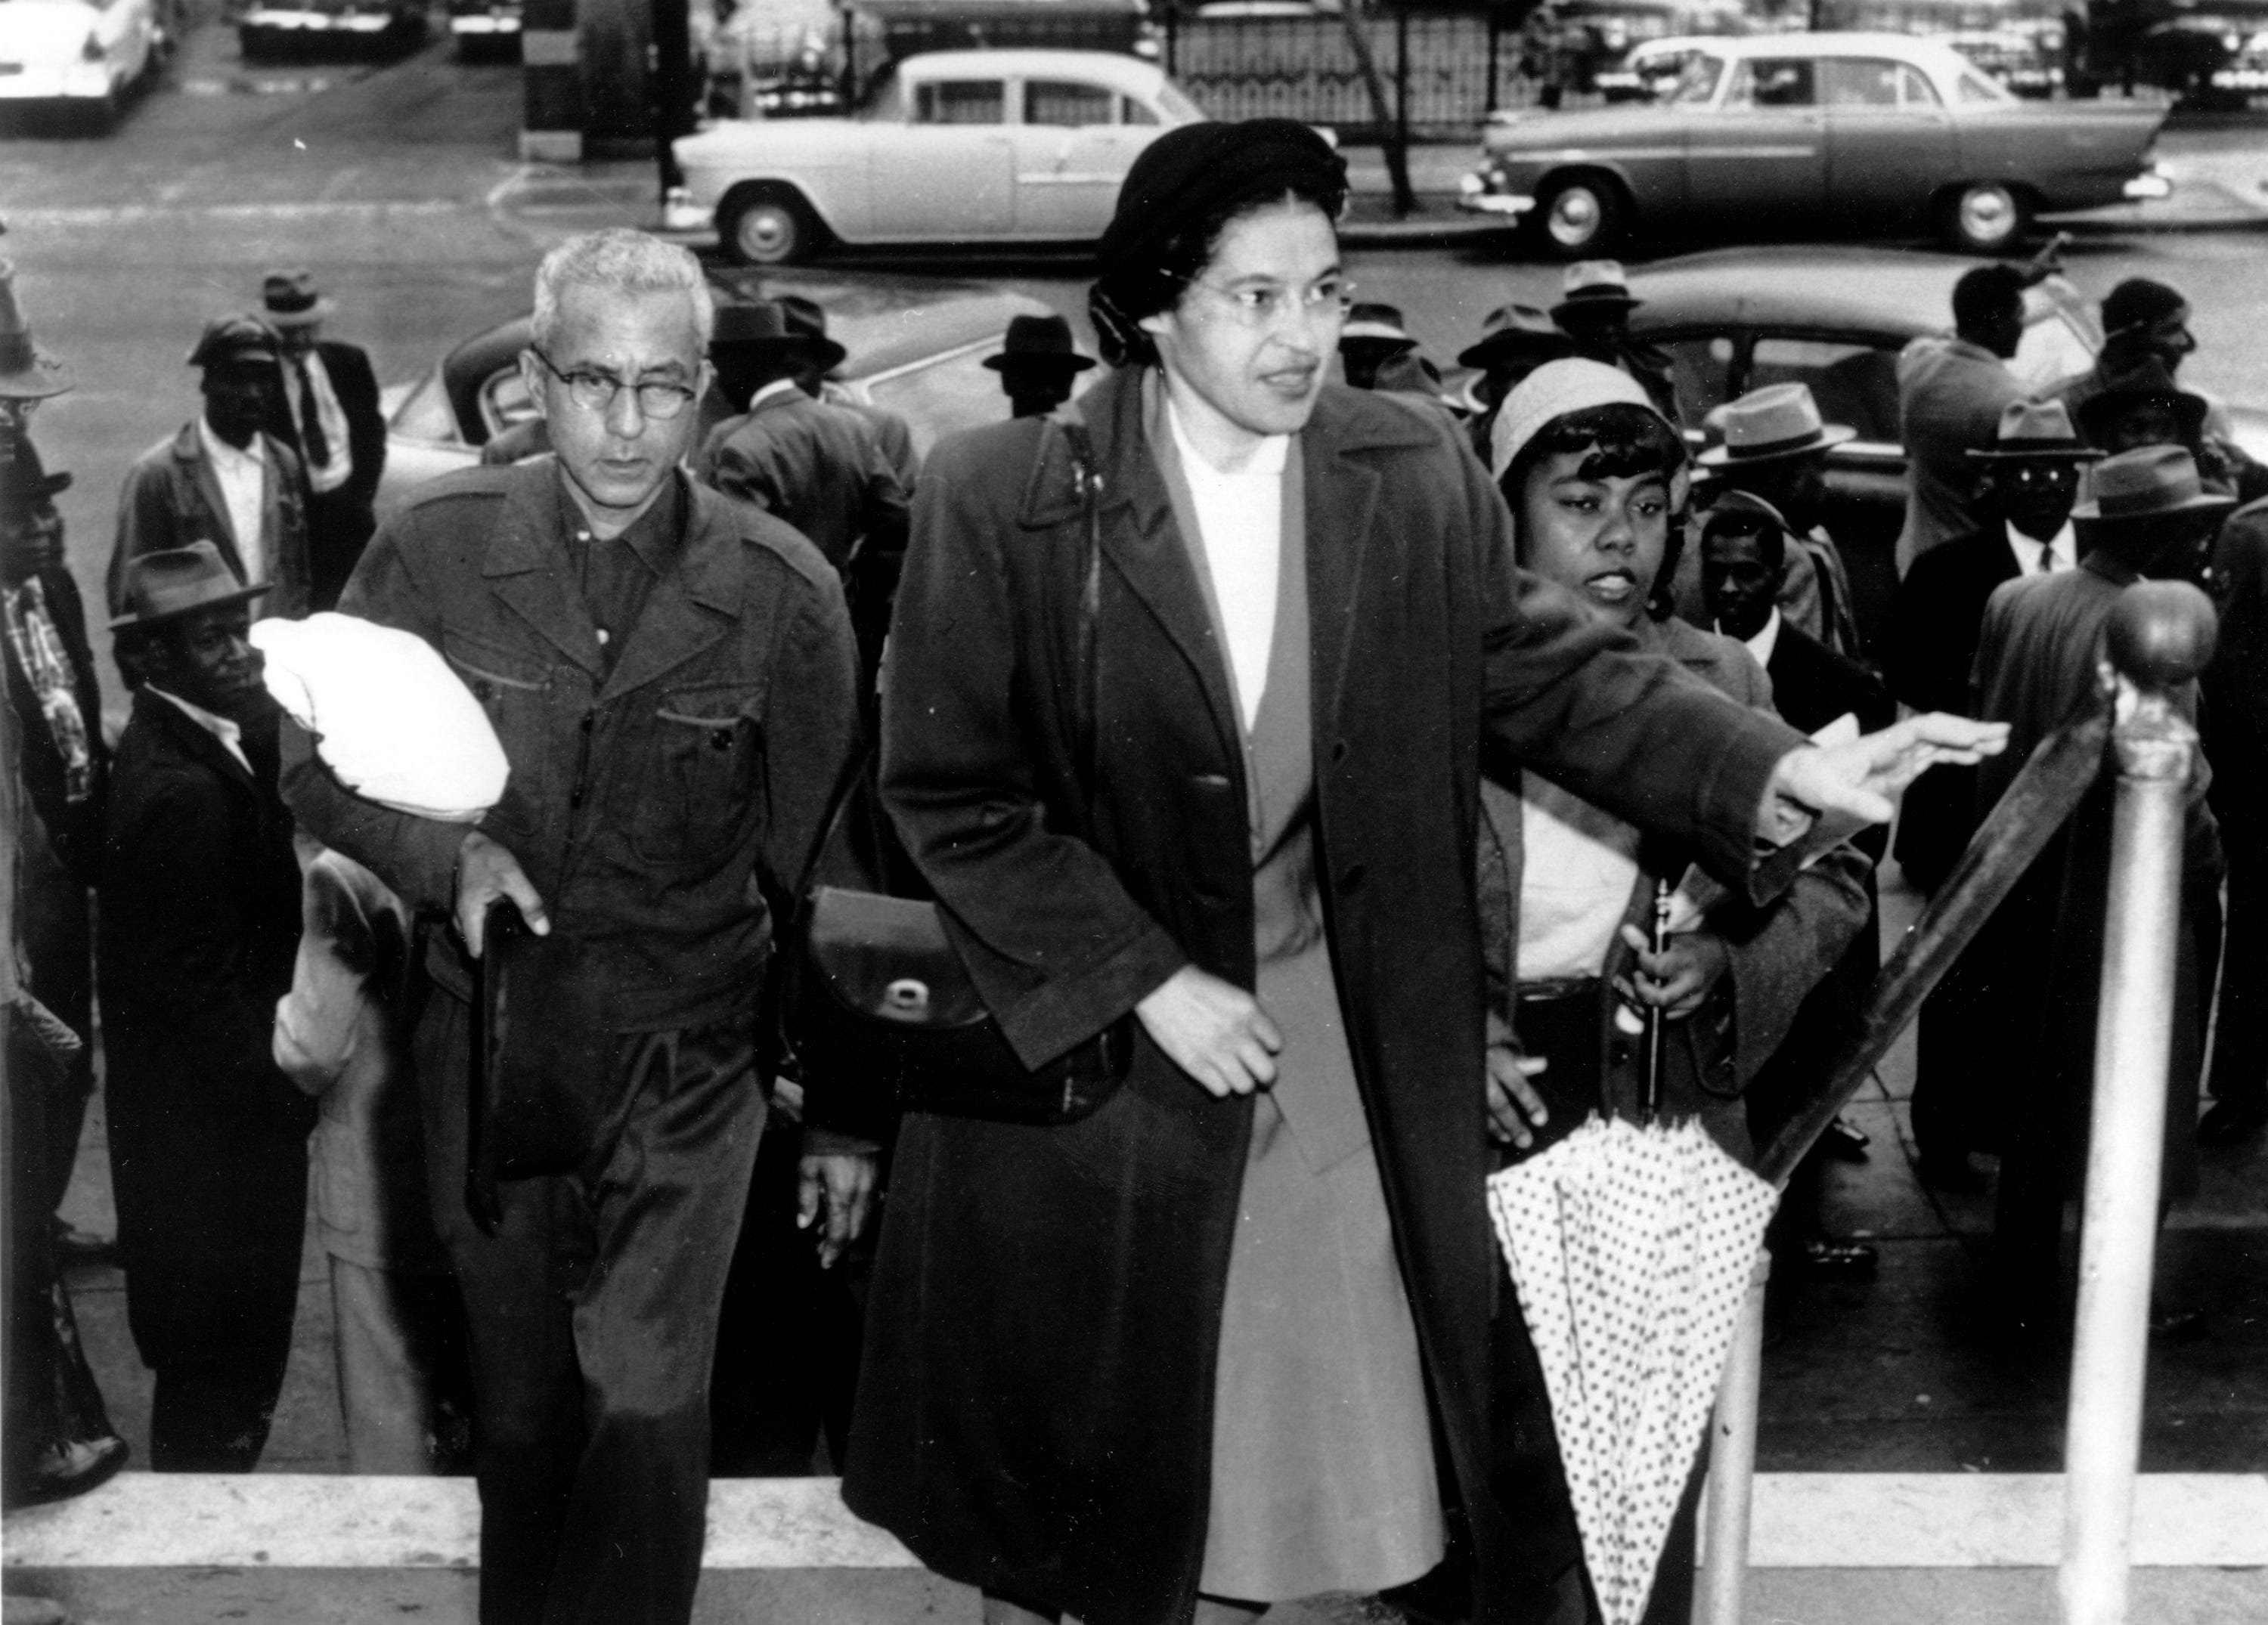 Rosa Parks arrives at circuit court to be arraigned in the racial bus boycott, Feb. 24, 1956, in Montgomery, Alabama. The boycott started Dec. 5, 1955, when Parks was fined for refusing to move to the Black section of a city bus.